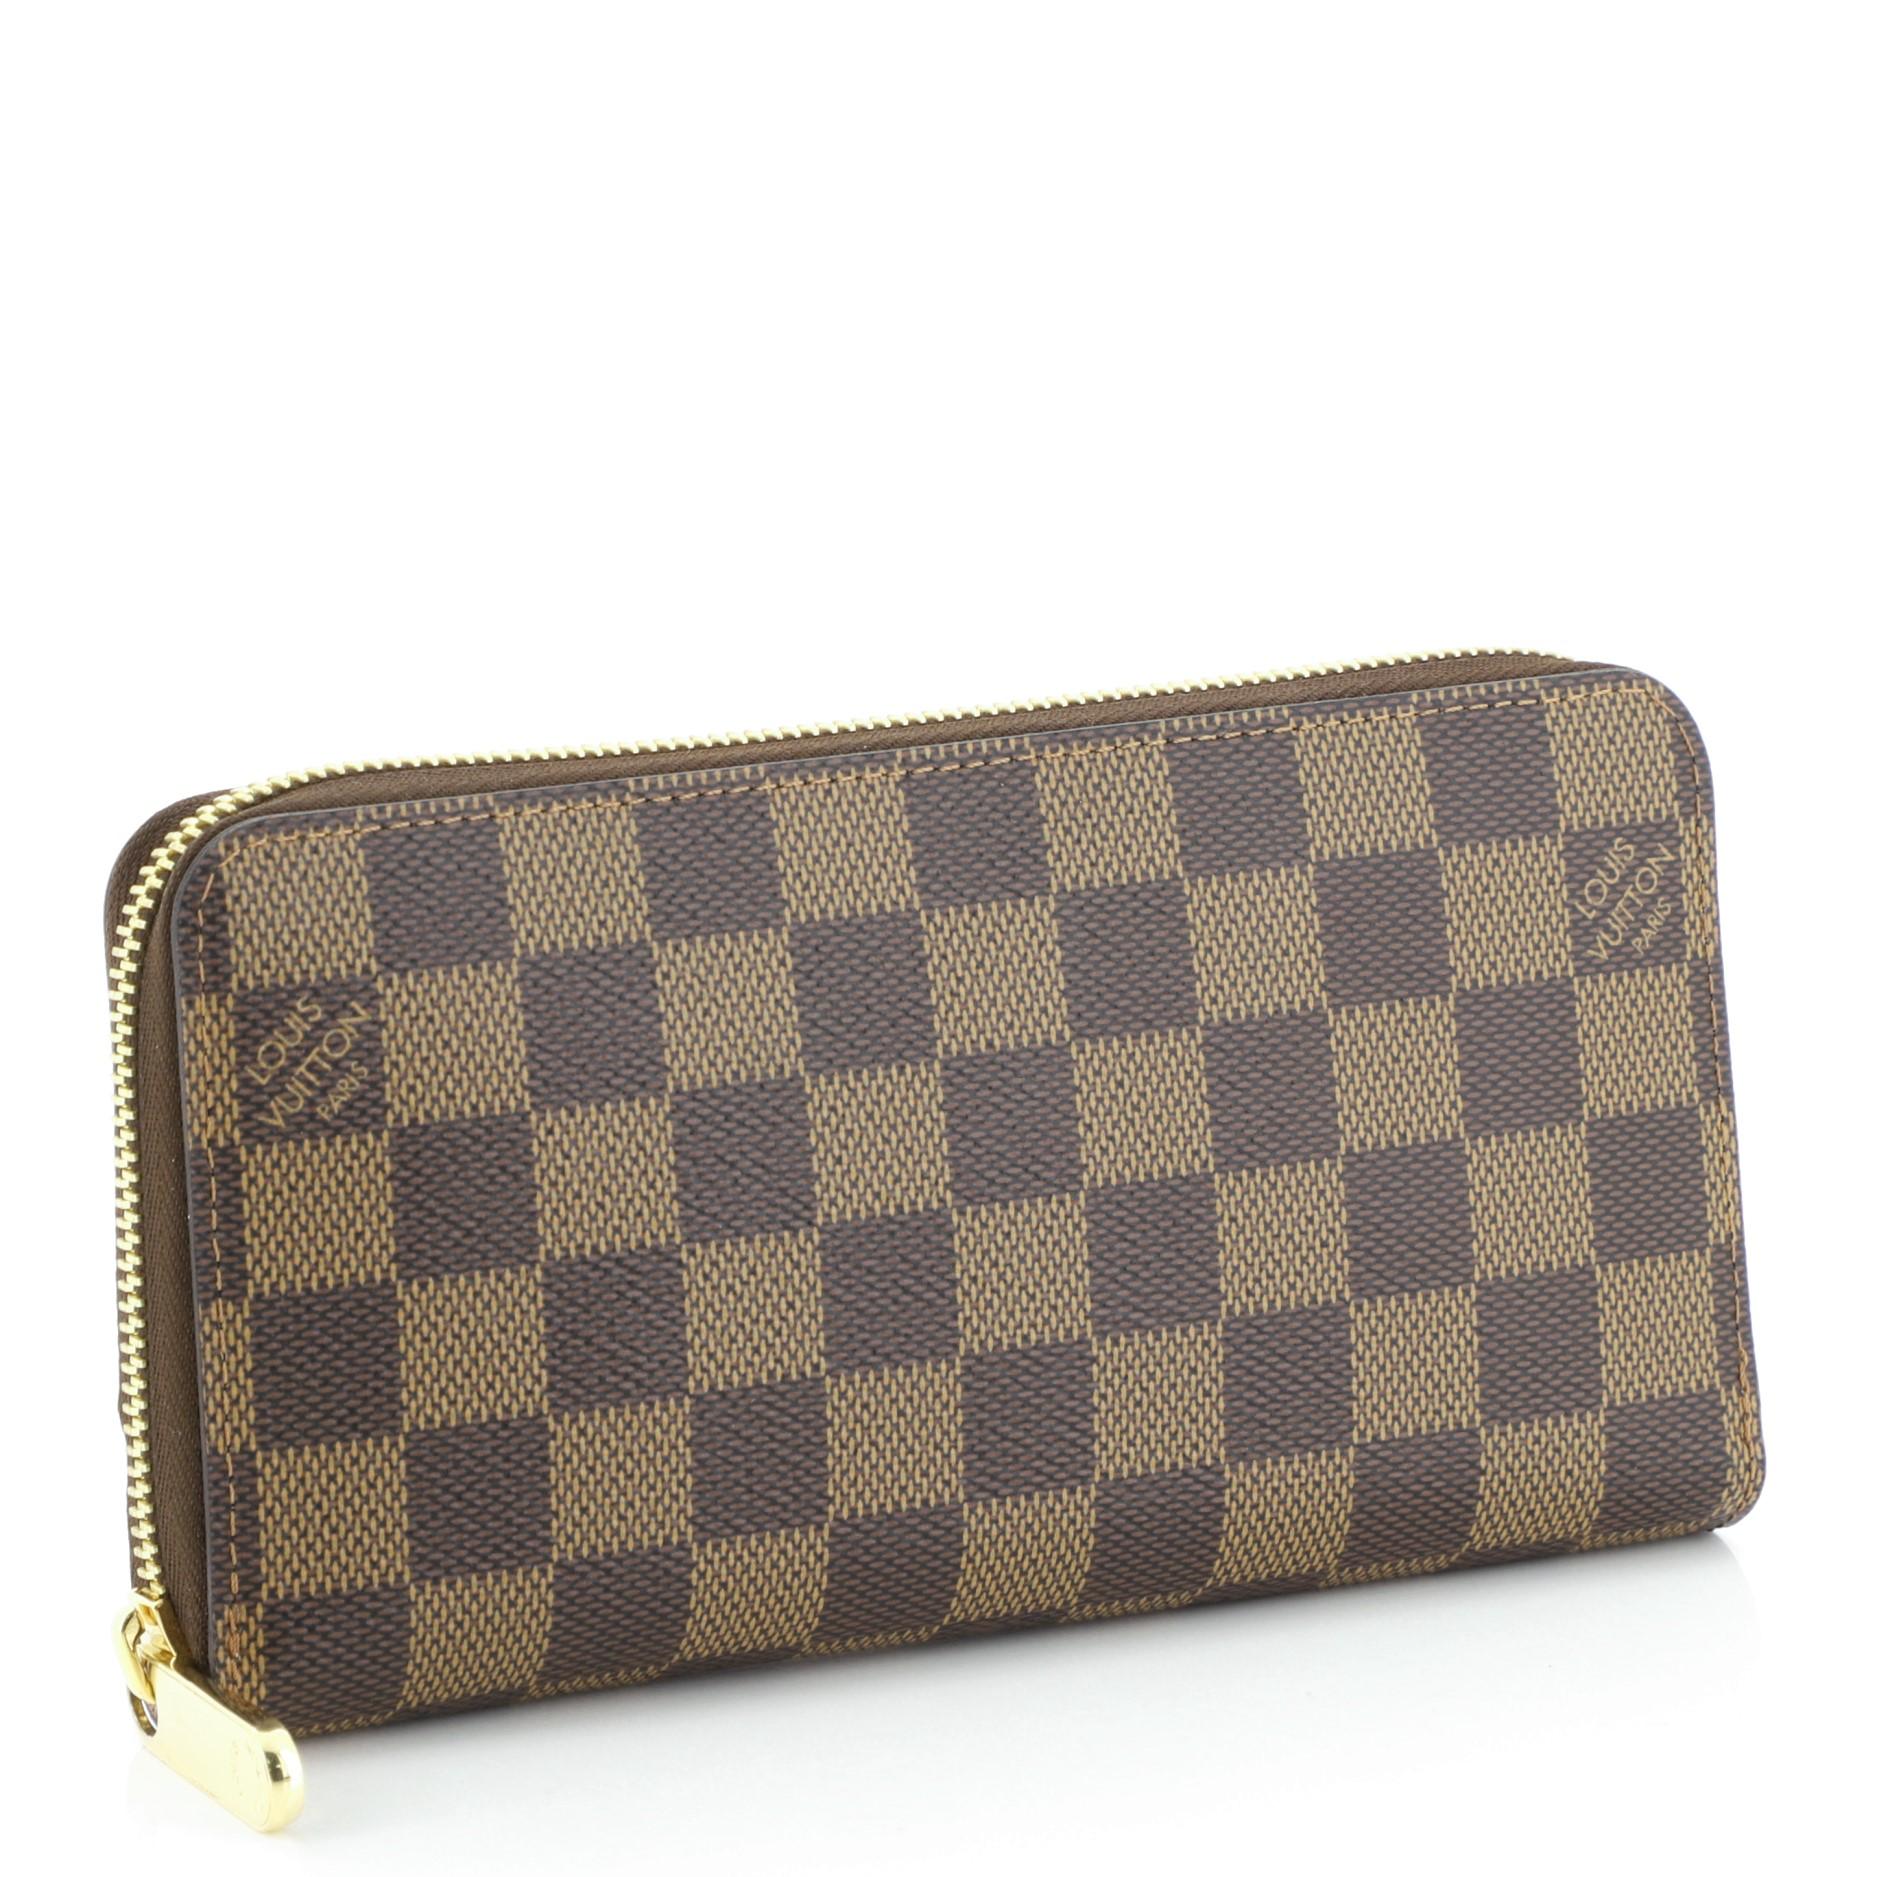 This Louis Vuitton Zippy Wallet Damier, crafted from damier ebene coated canvas, features gold-tone hardware. Its all-around zip closure opens to a pink leather interior with multiple card slots, two gusseted open pockets, and zip pocket.